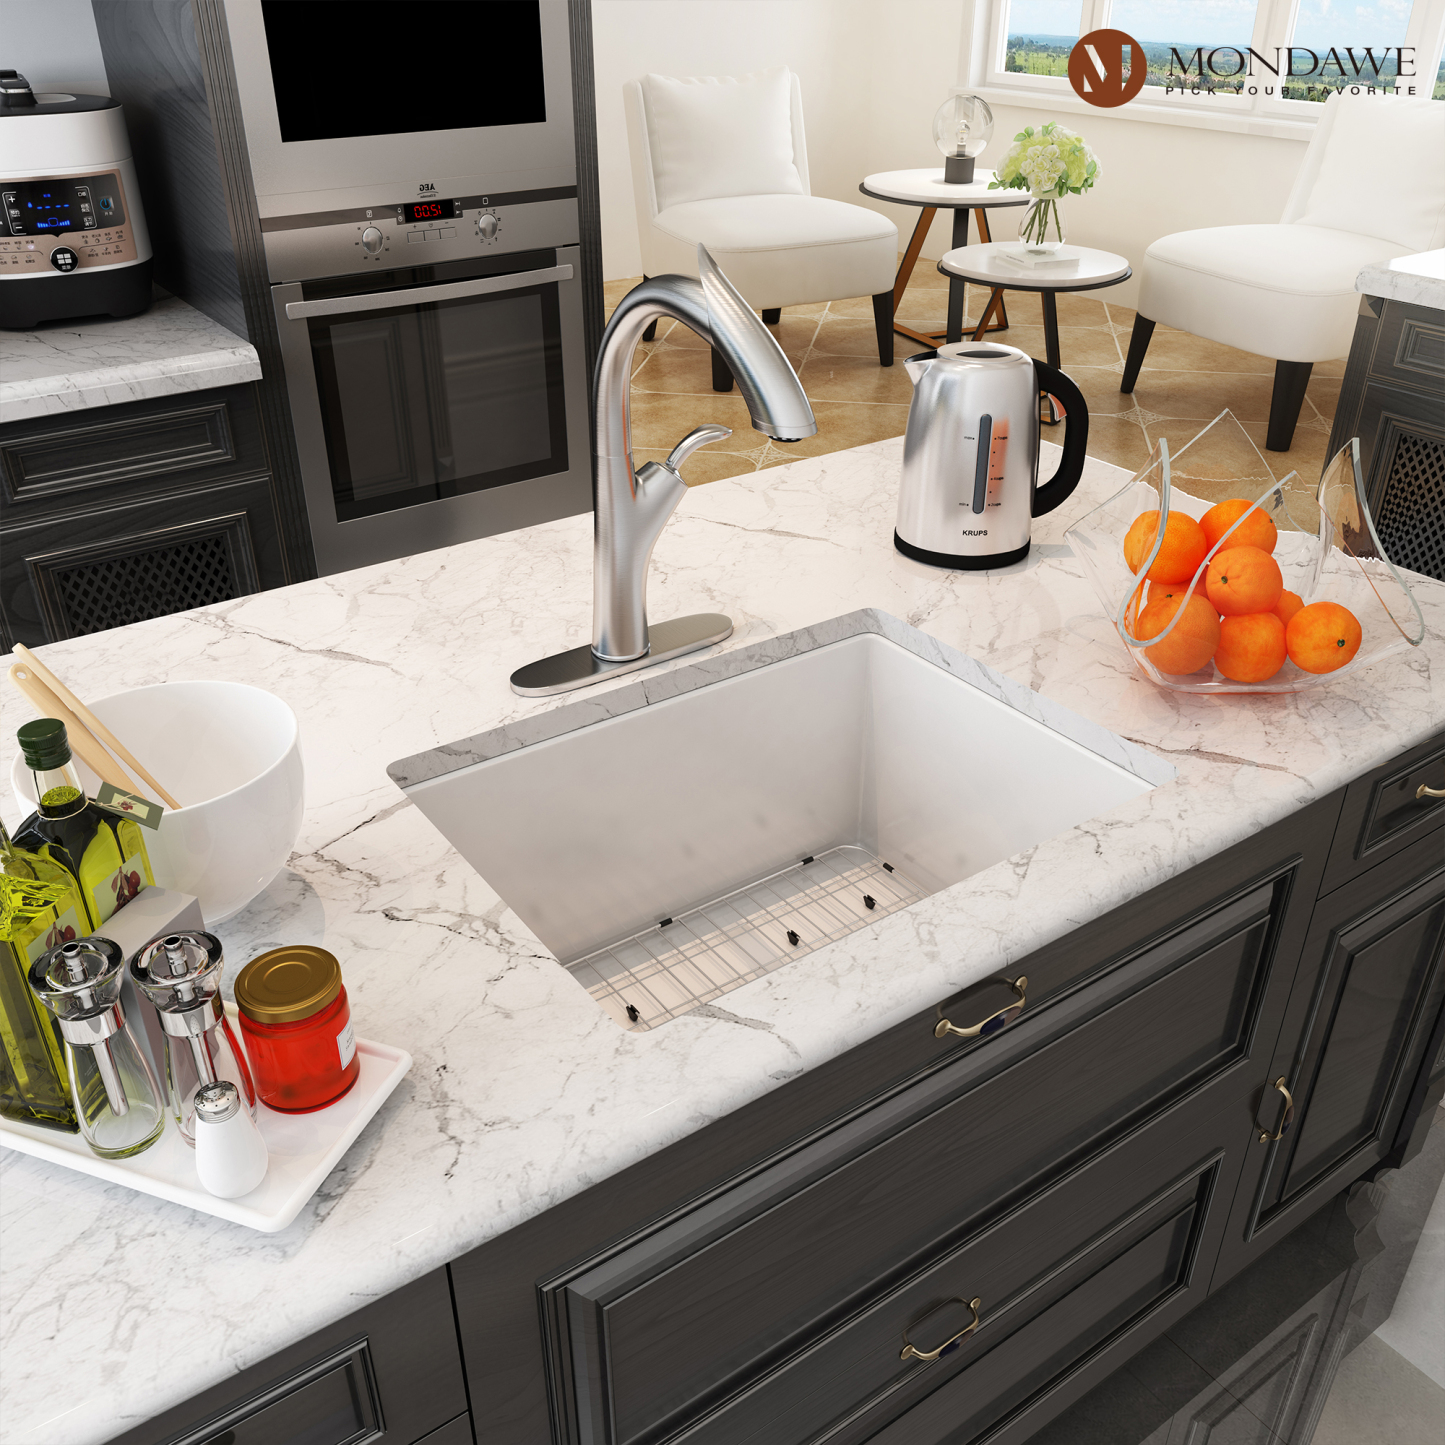 24 Jnch Undermount Single Bowl Fireclay Kitchen Sink In White Comes With Pull Down Kitchen Faucet-Mondawe